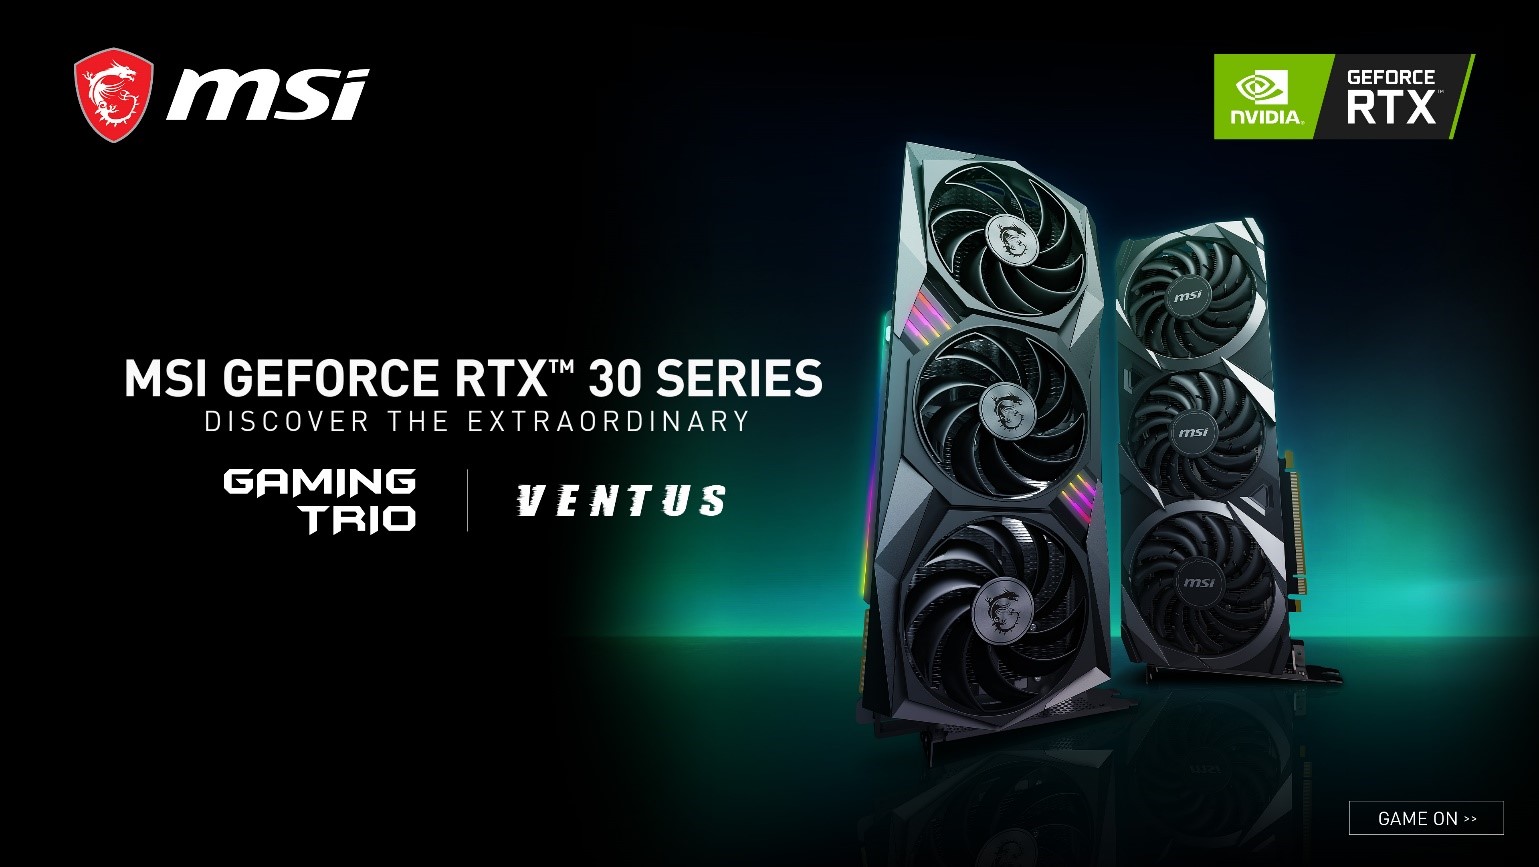 MSI announces GeForce 3090, RTX 3080 and 3070 graphics cards VideoCardz.com